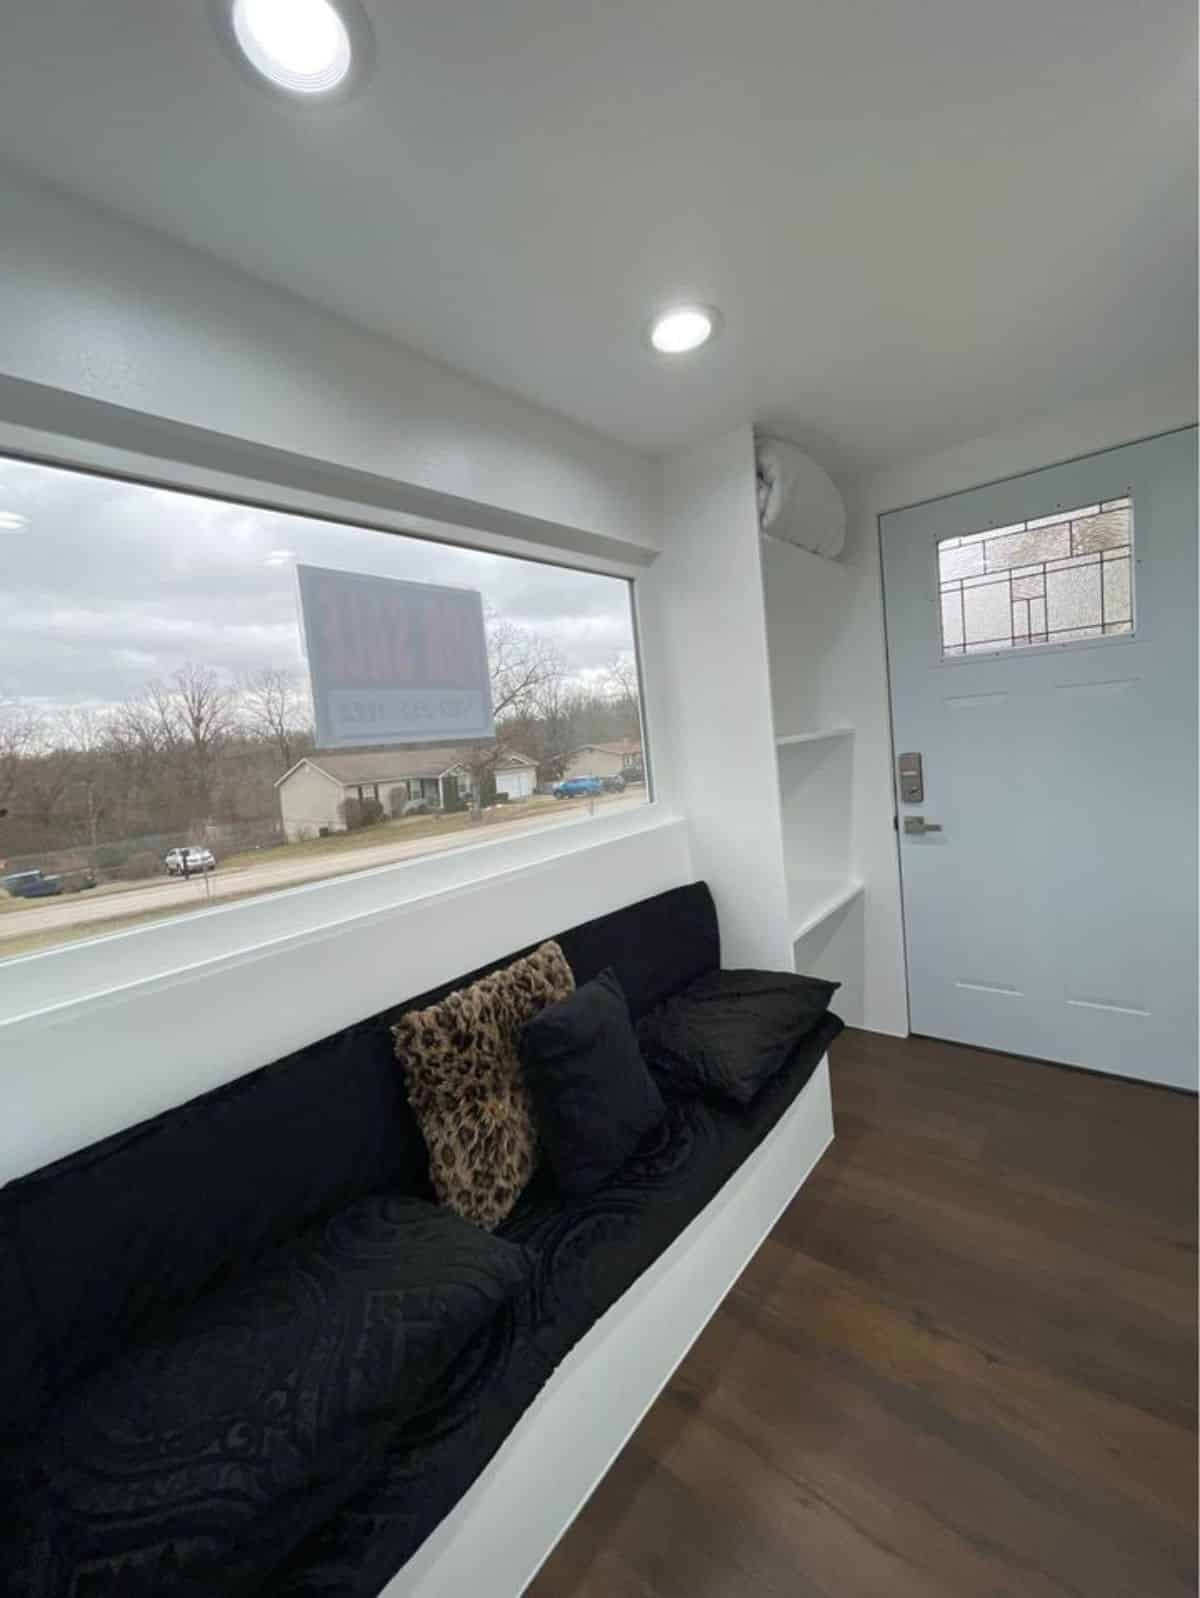 Living area of mobile tiny house